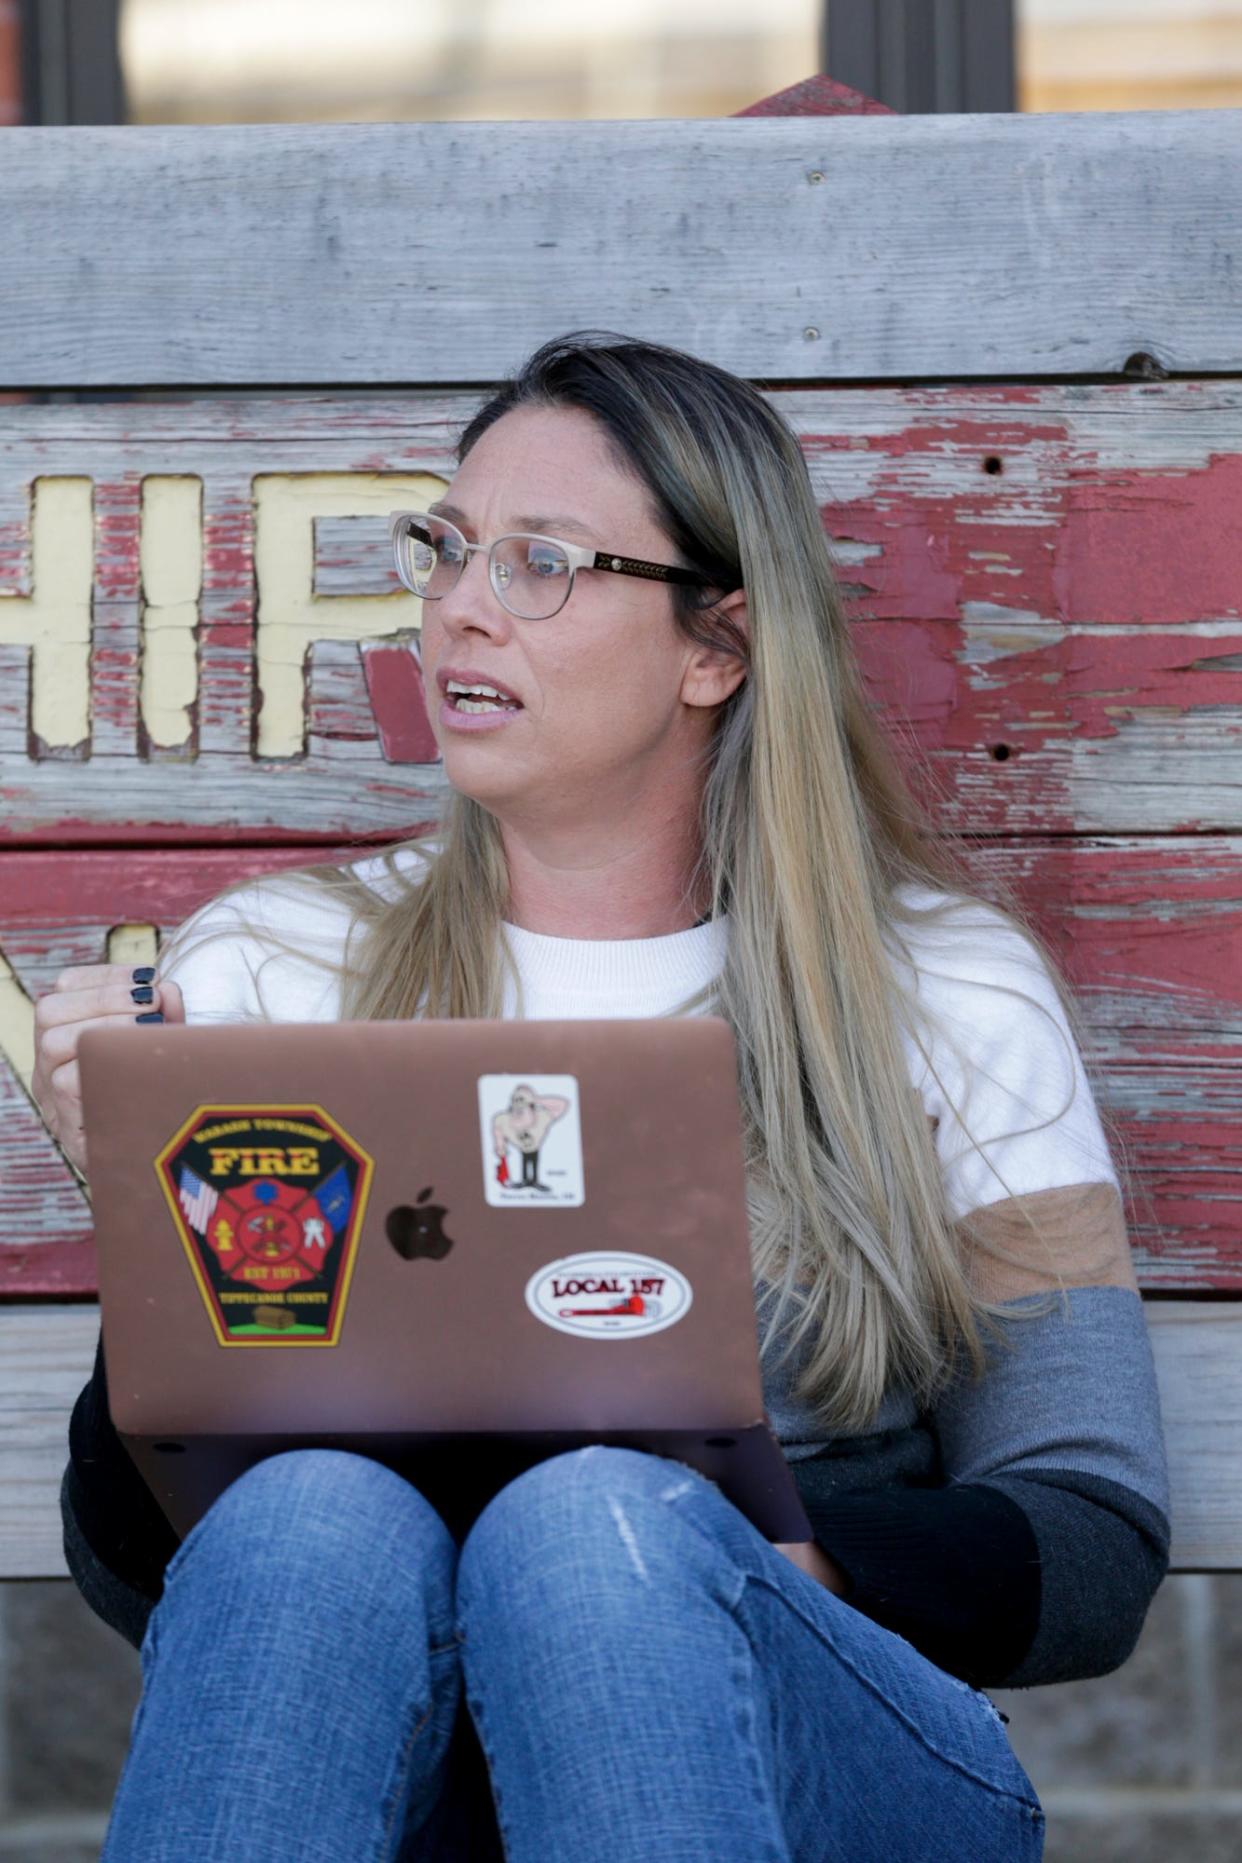 Wabash Township Trustee Jennifer Teising talks with the Journal & Courier before she was to host a meeting on the future of the Wabash Township Volunteer Fire Department, Tuesday, March 9, 2021 in West Lafayette.